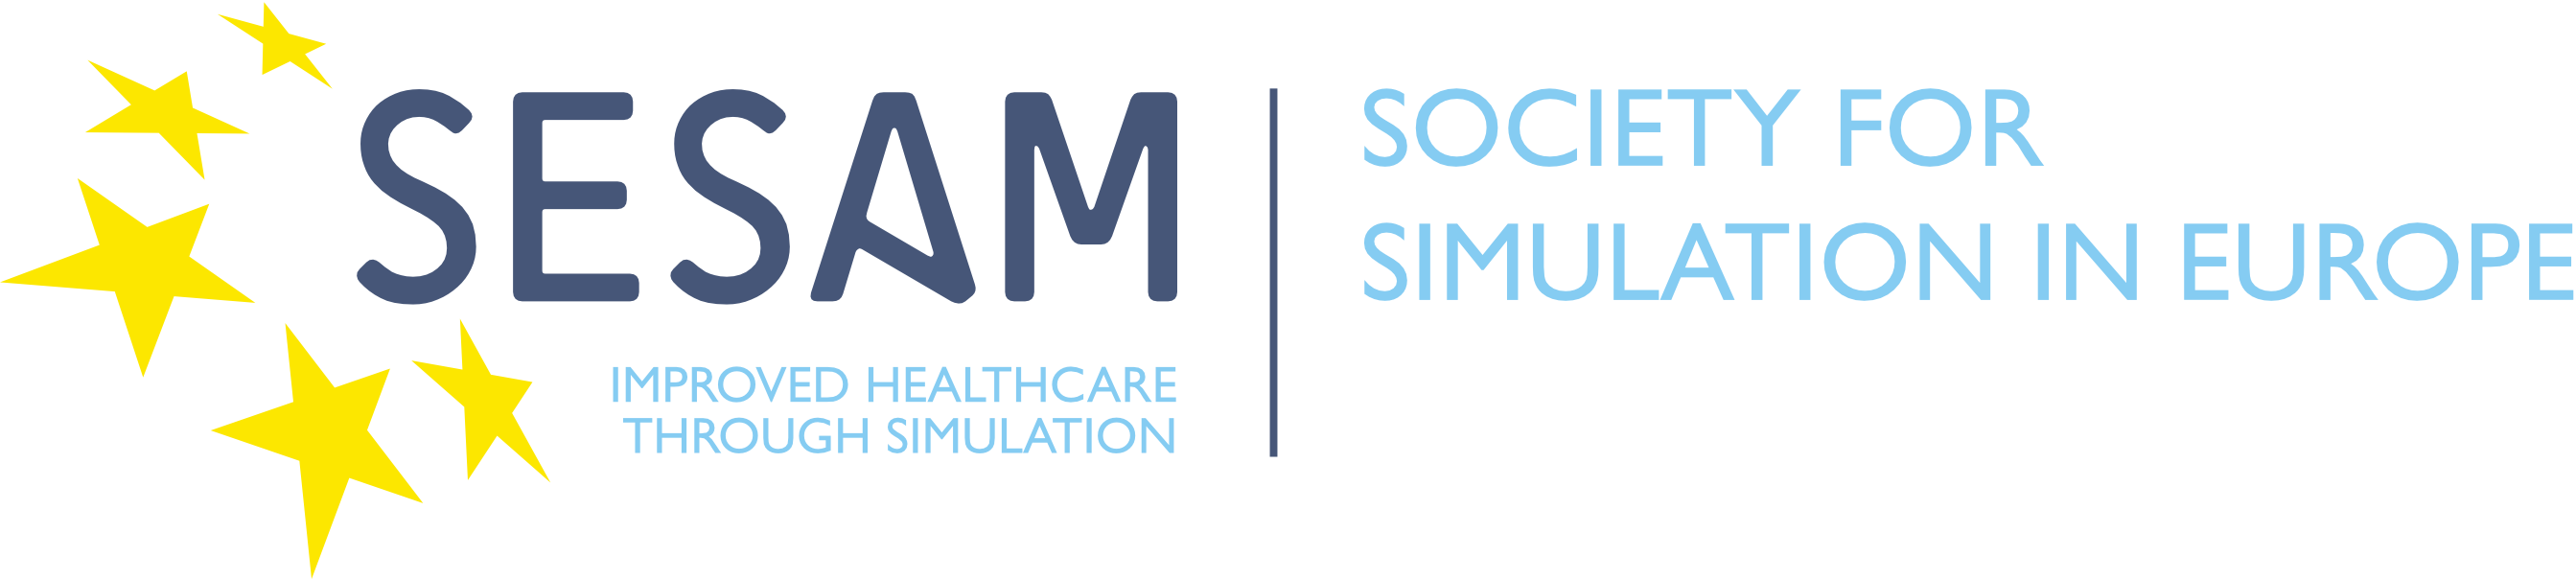 Society For Simulation in Europe